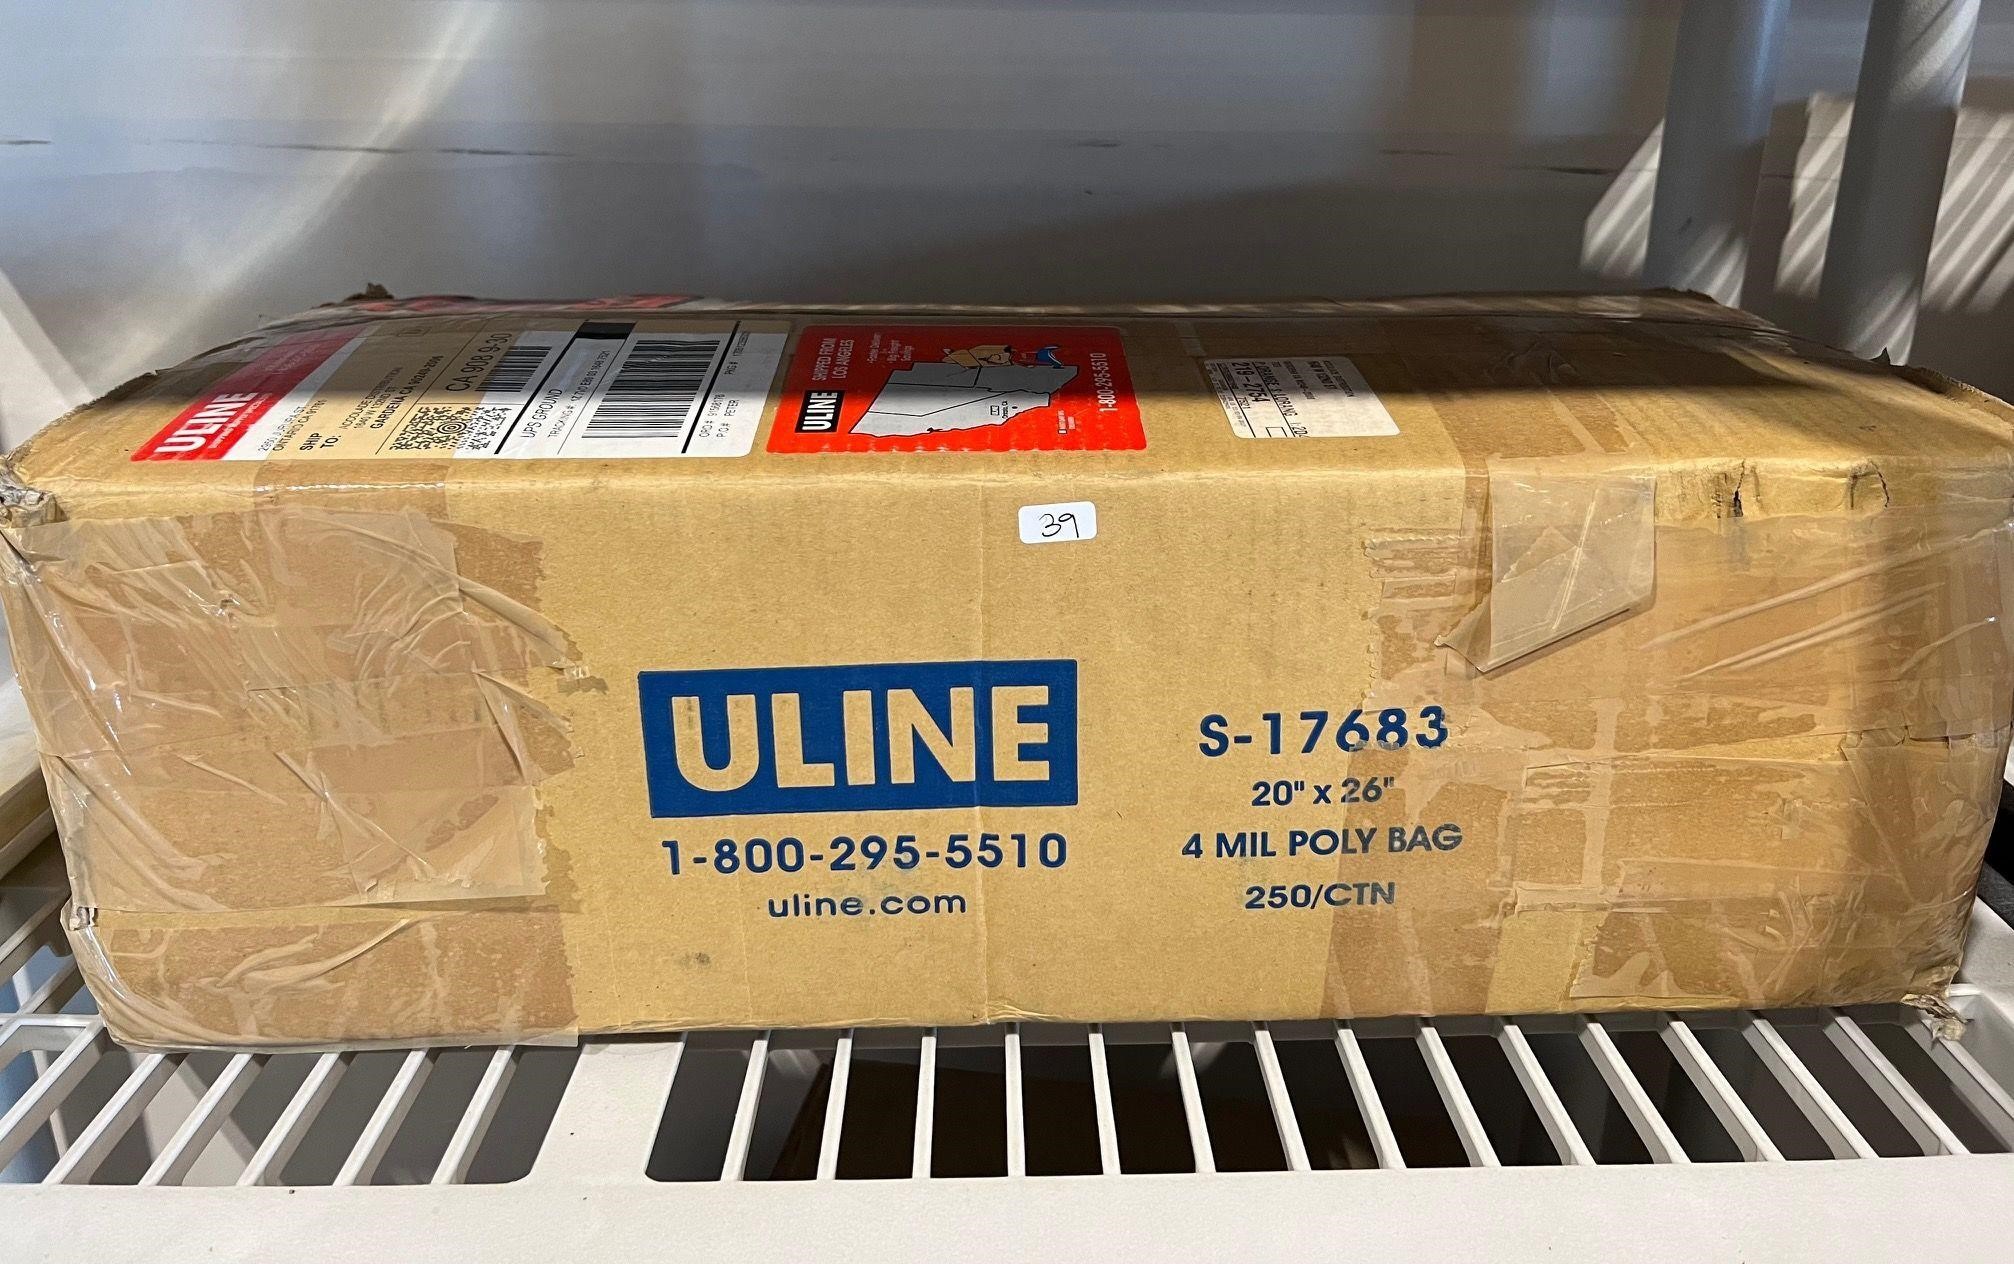 ULINE 4MIL POLY BAGS - UNOPENED BOX